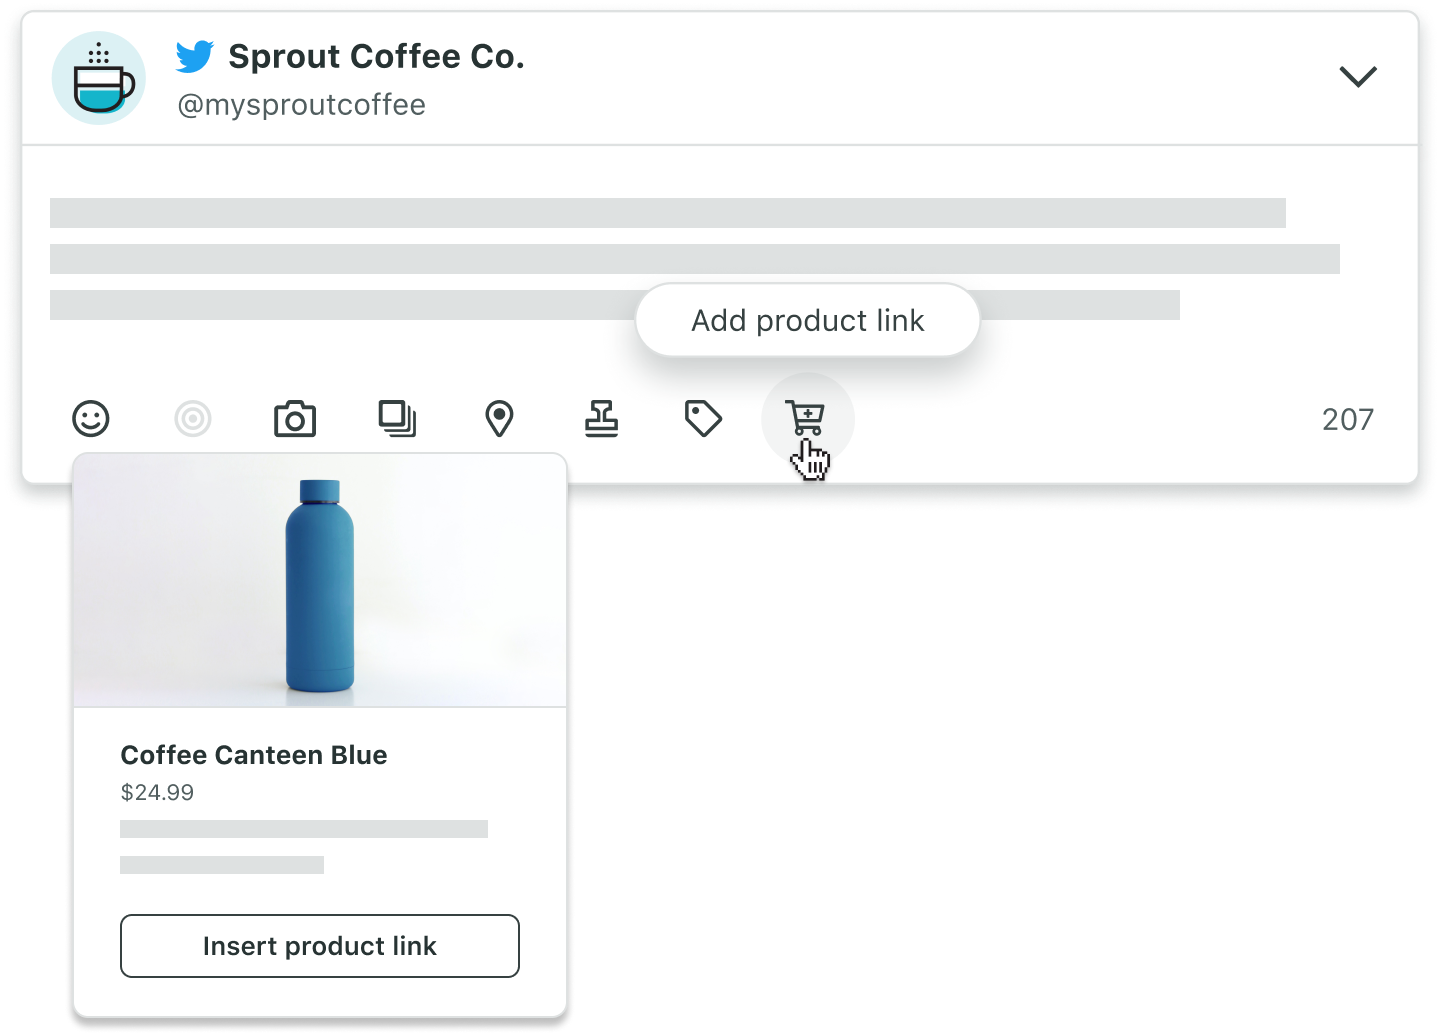 In the same way you can add an emoji, photo or location to a new Twitter post, you can also include a product link from within Compose.